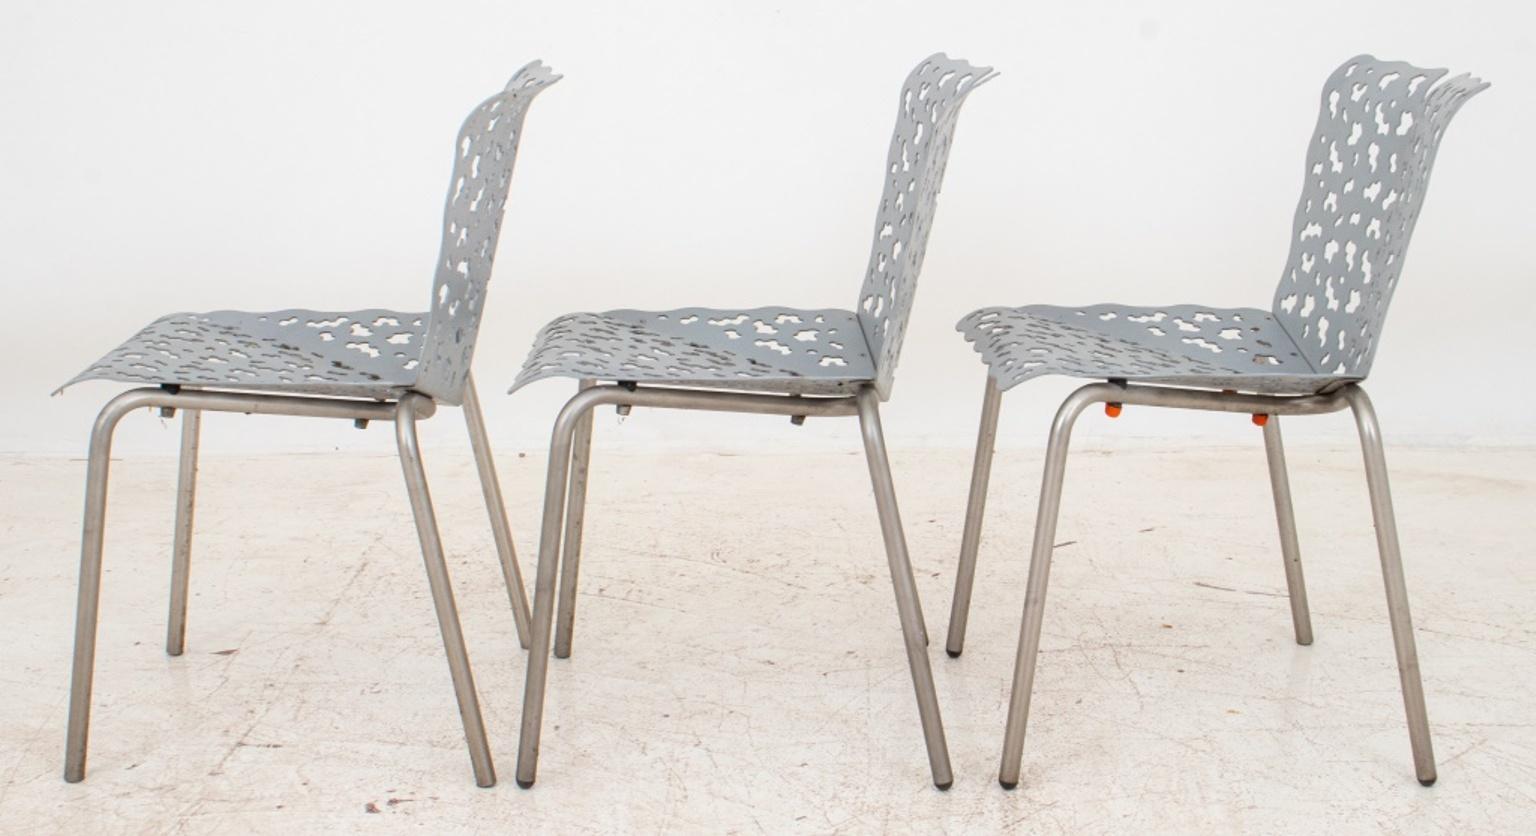 Richard Schultz (American, 1926 - 2021) for Knoll Studio Topiary stacking cafe side chairs (designed 1993), three (3) in the form of a densely cropped hedge, with grey finish (losses) on steel legs. 30.5